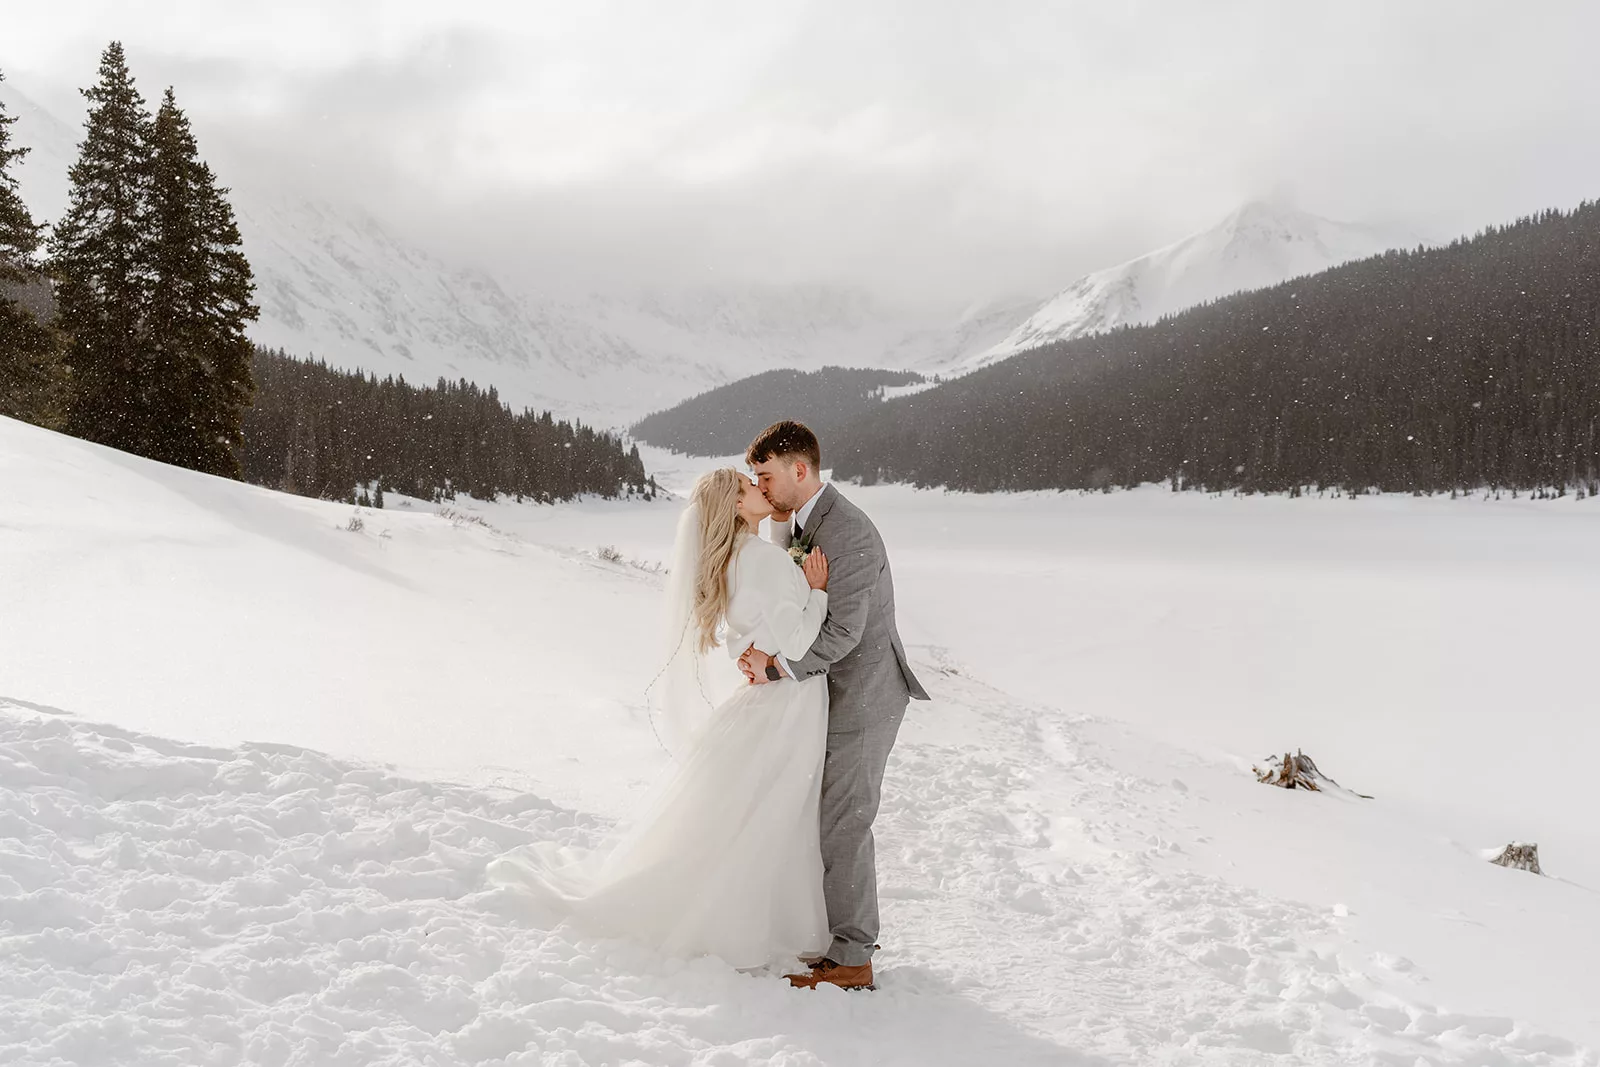 A bride and groom embrace in the snowy mountain town of Breck while enjoying their skiing adventure elopement.